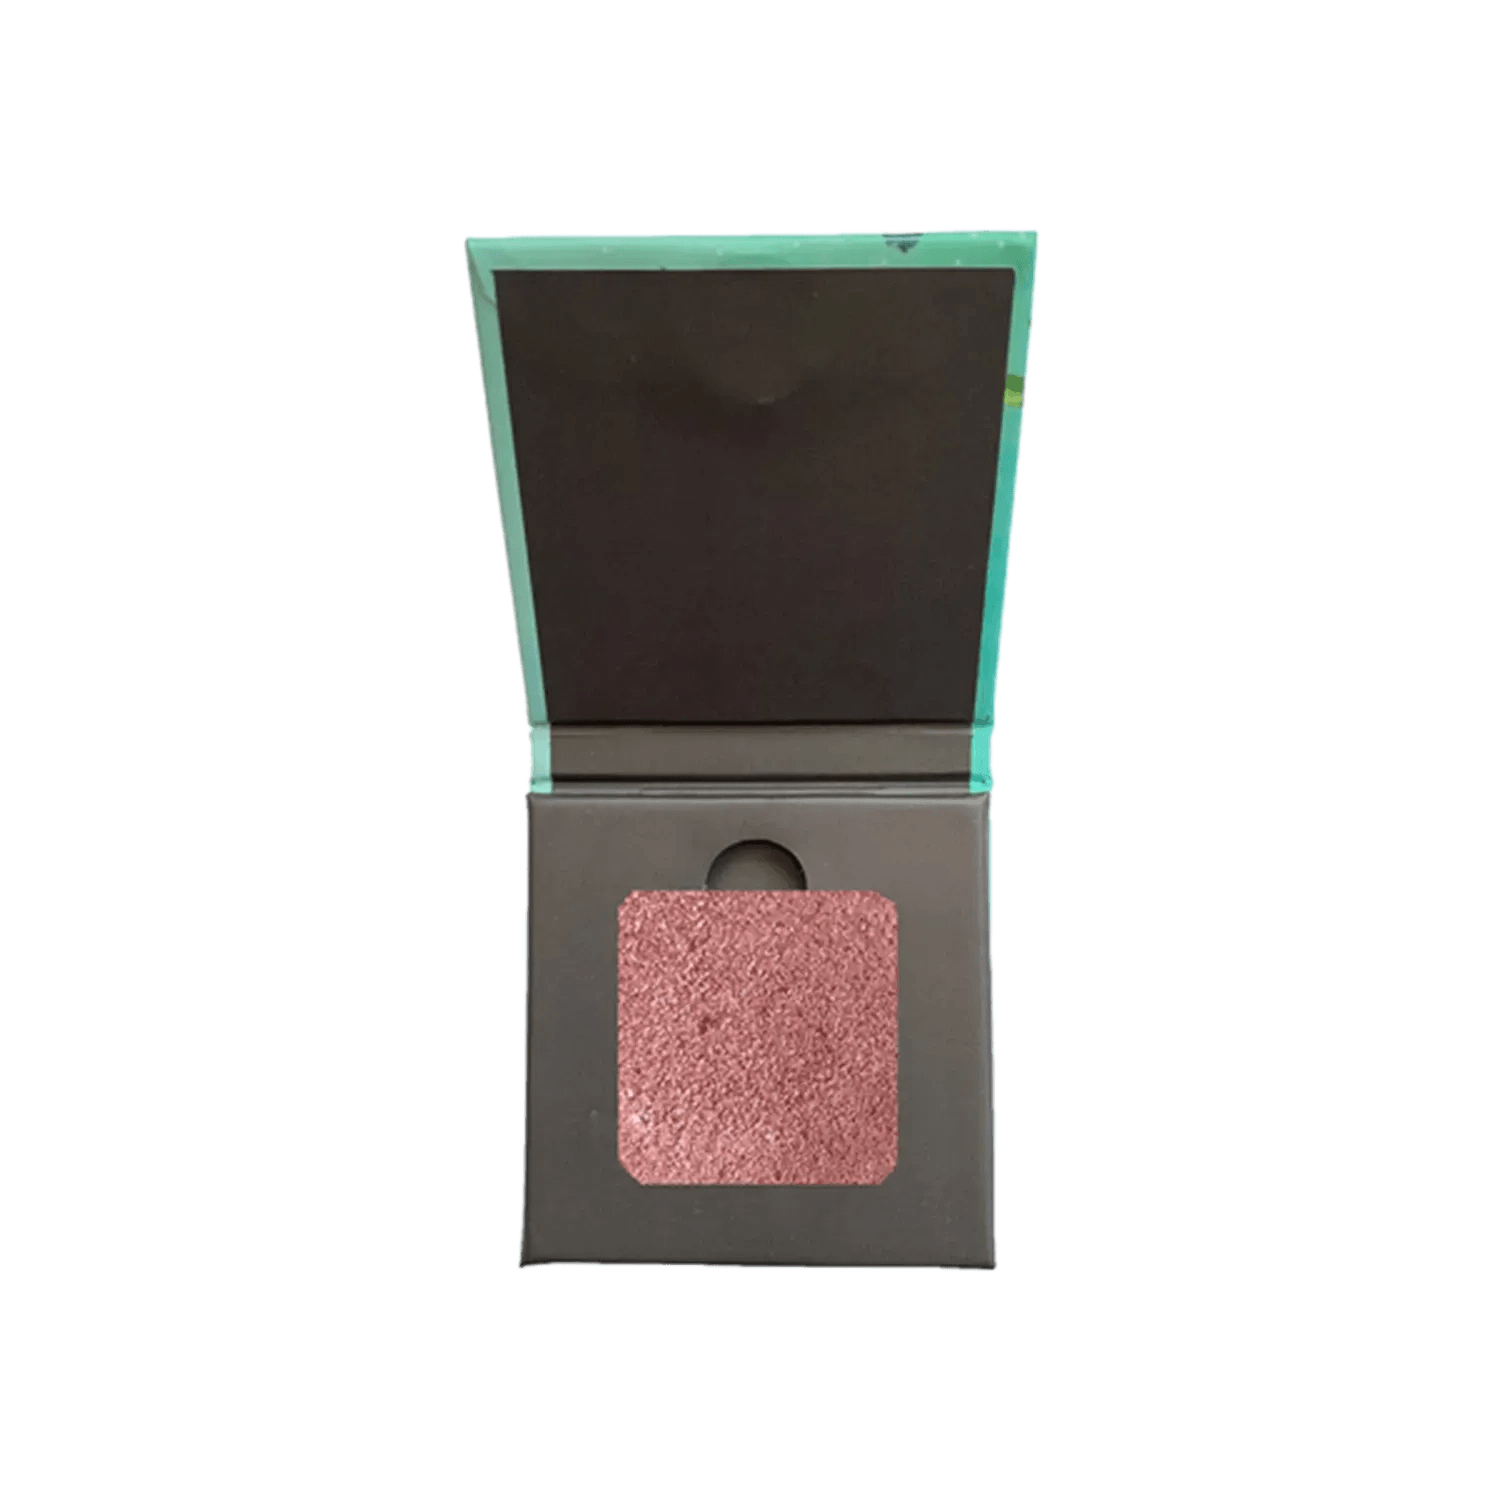 DISGUISE | DISGUISE Satin Smooth Eyeshadow Squares - 206 Shimmer Pink Autumn (4.5g)